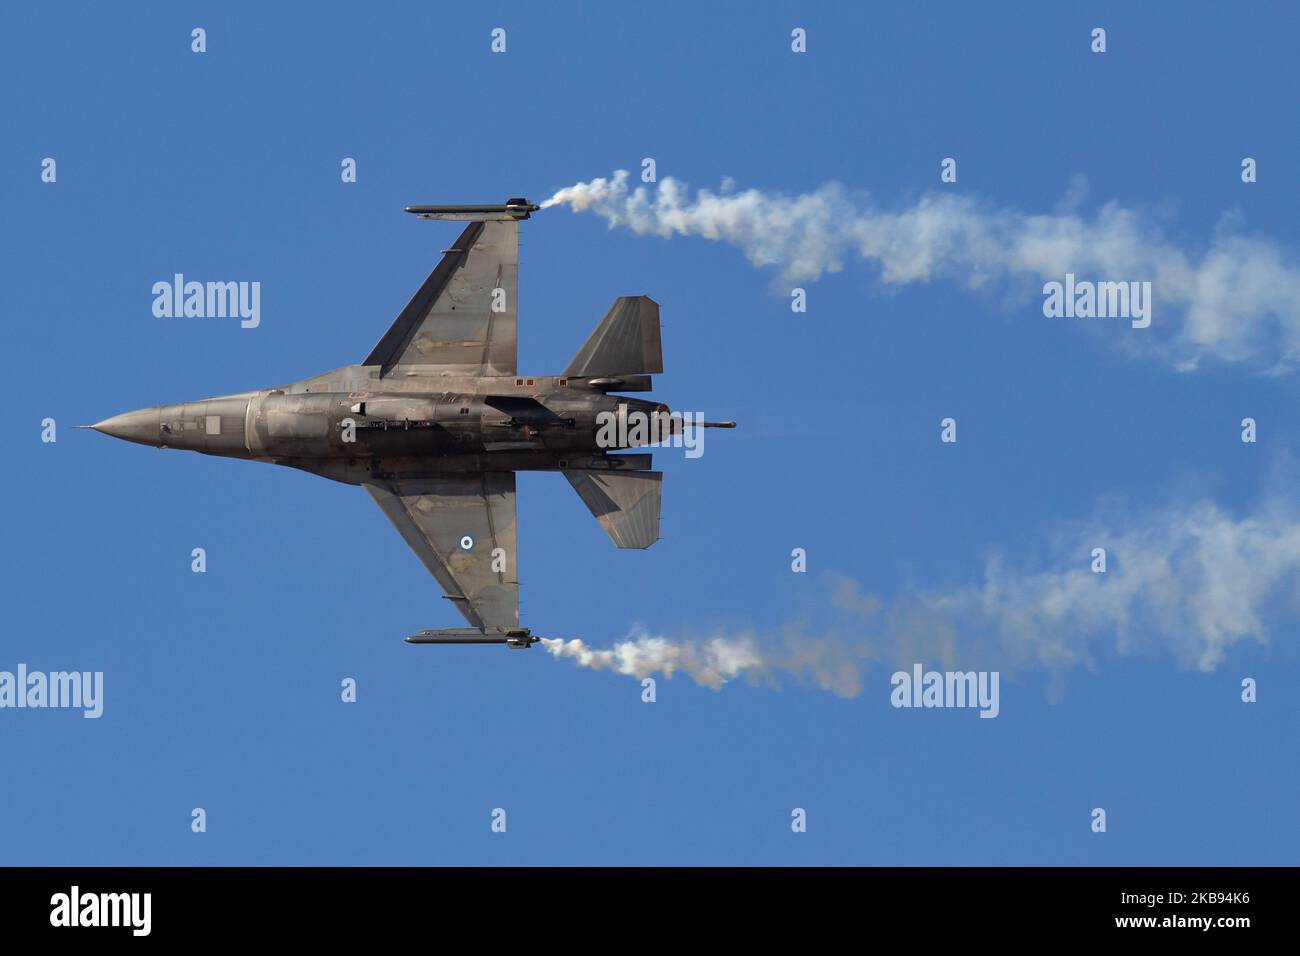 Greek HAF F16 ' Zeus ' Demo Team during the Athens Flying Week 2019 Air Show. Hellenic Air Force Lockheed Martin F-16C Block 52 ( F-16C Blk 52+ ) from 340 Squadron Mira ( 340SQN 'Fox' ) as seen in a flying demonstration from demo pilot Major Georgios Papadakis at Tanagra Military Air Base LGTG airport. Athens, Greece - September 22, 2019 (Photo by Nicolas Economou/NurPhoto) Stock Photo